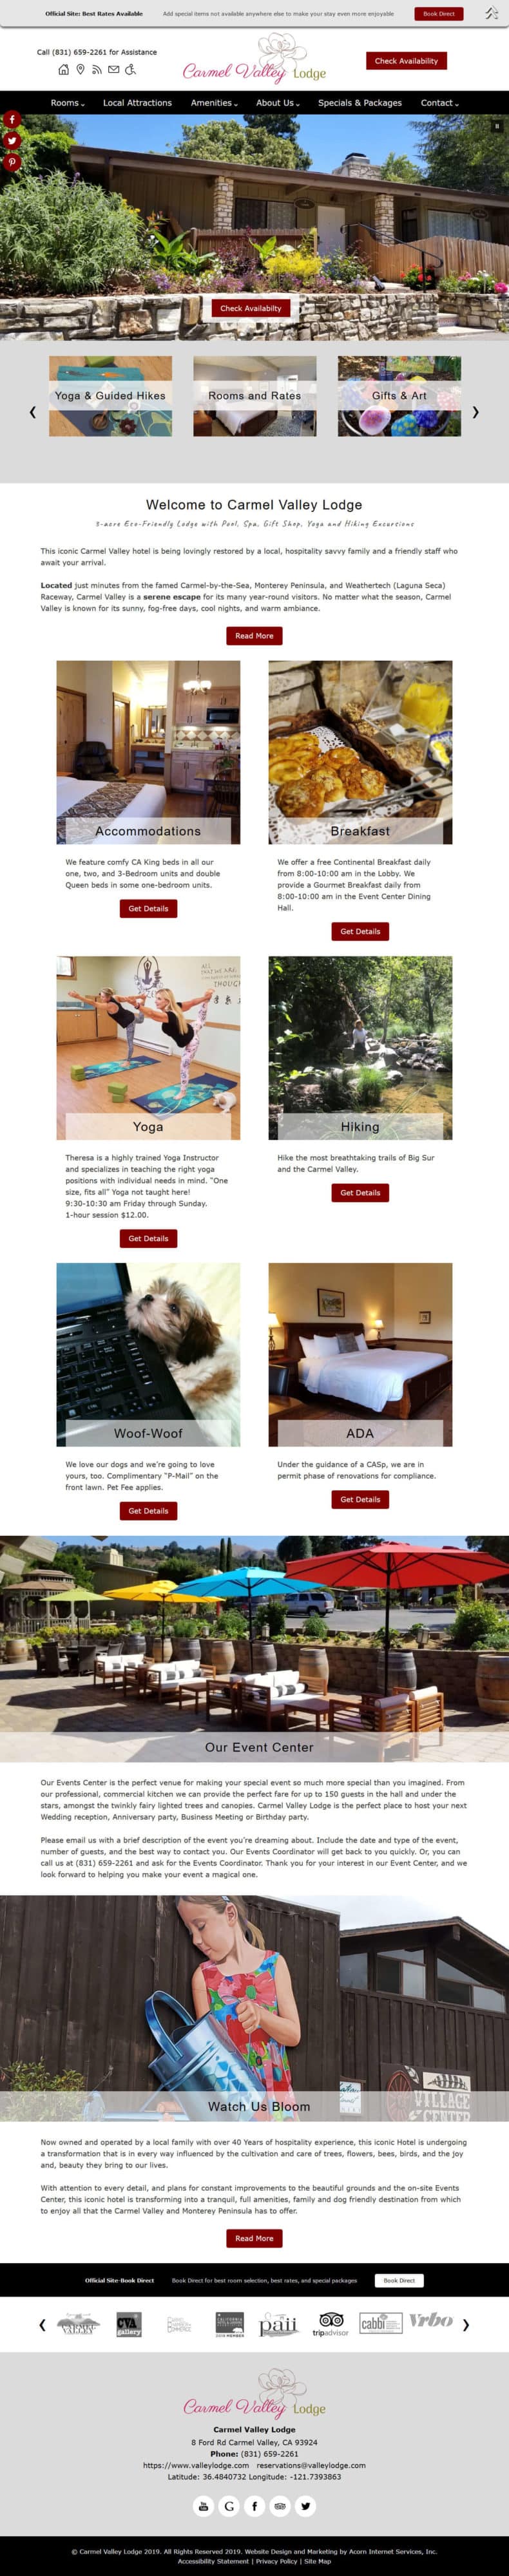 Home page screenshot of Carmel Valley Lodge - Standard